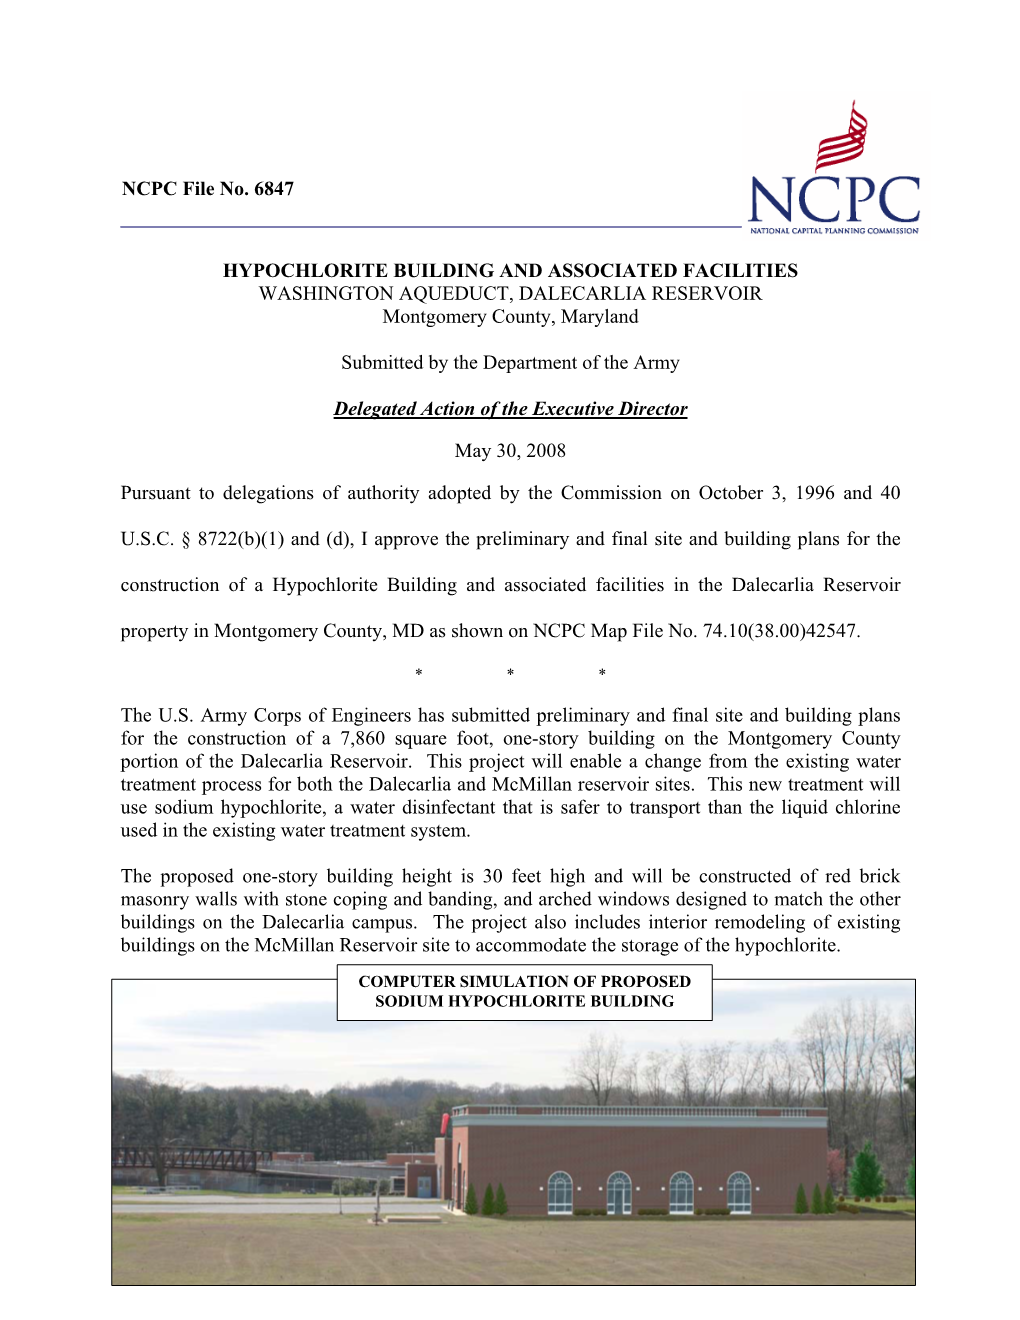 NCPC File No. 6847 HYPOCHLORITE BUILDING and ASSOCIATED